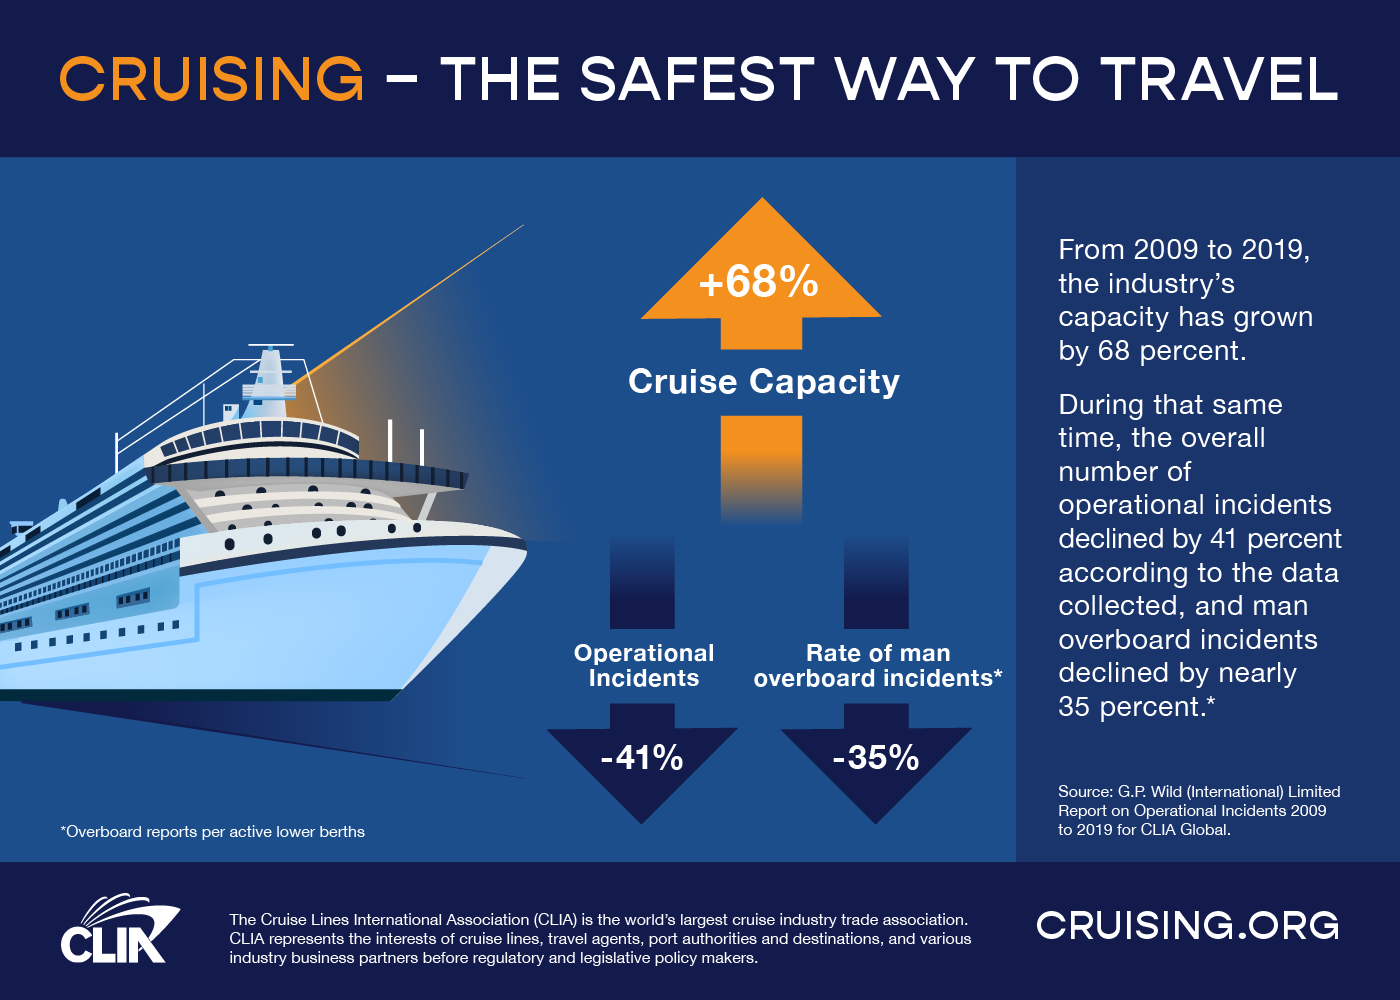 Cruise Tips for 1st Time Cruisers